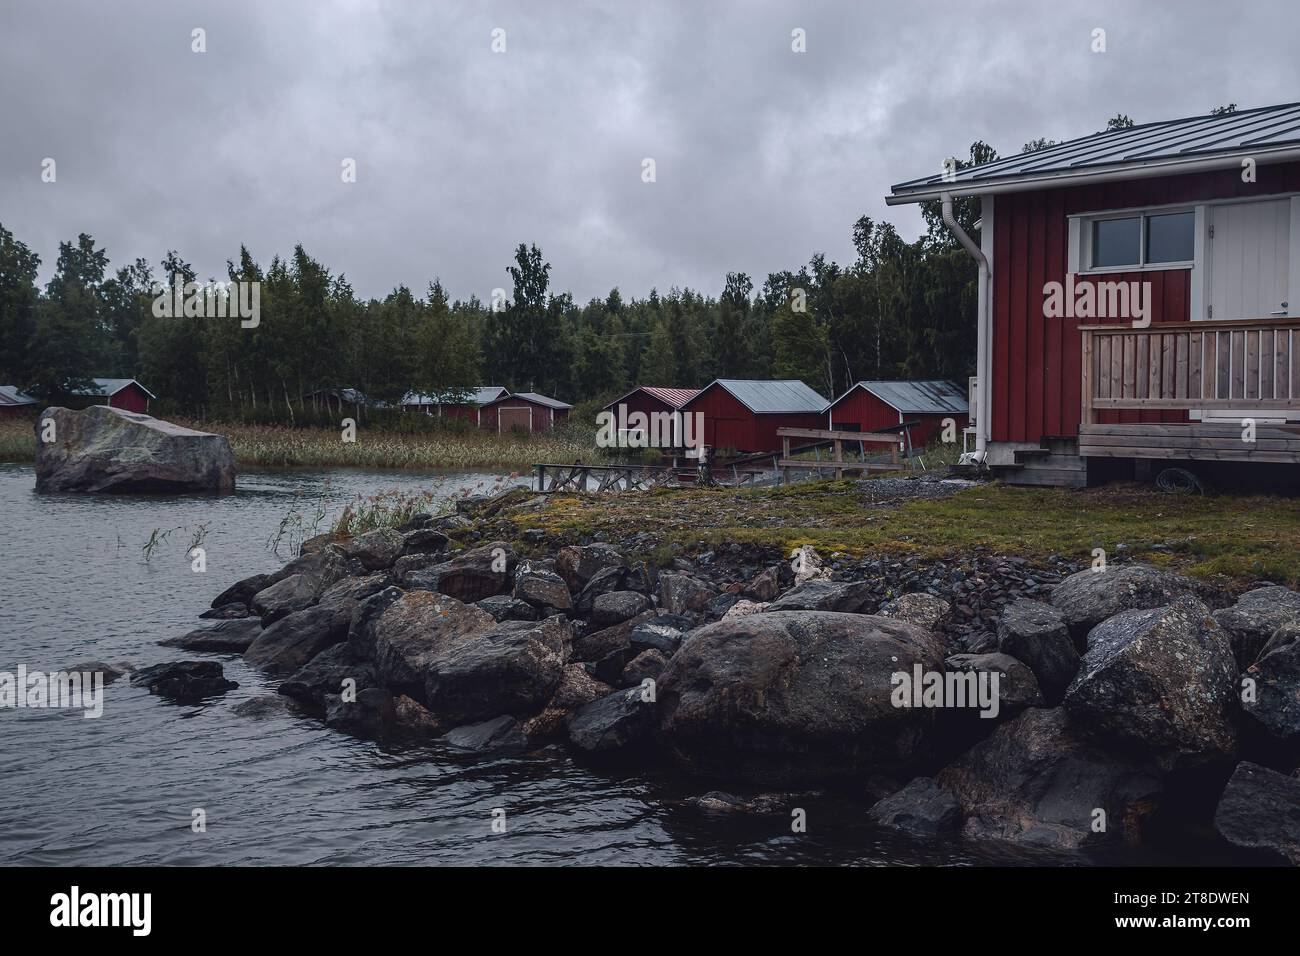 red wooden houses on the seashore in a Finnish village Stock Photo